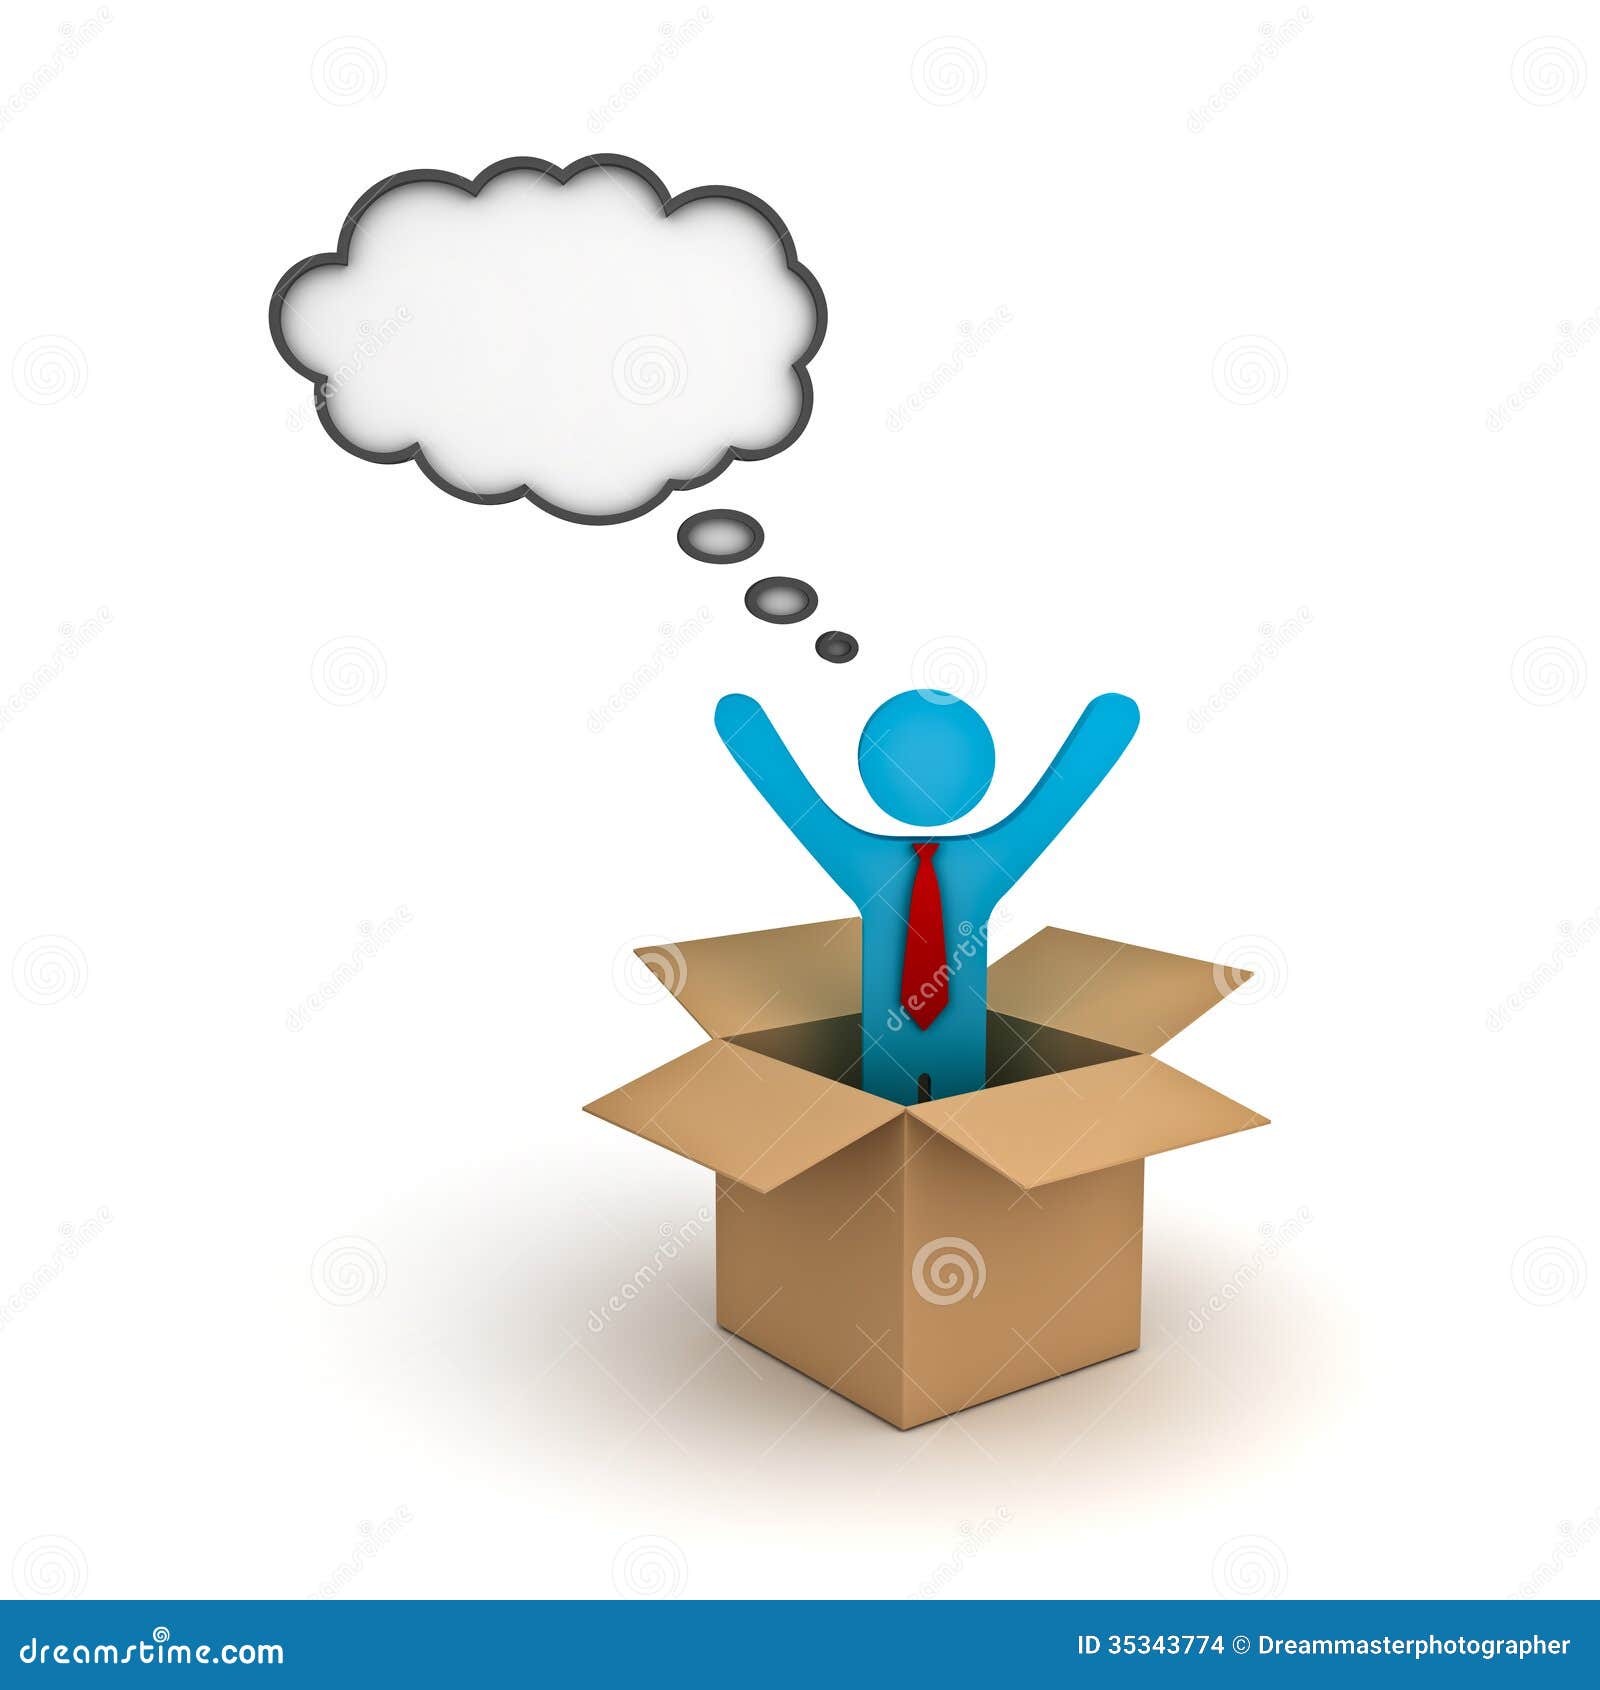 out of the box thinking clipart